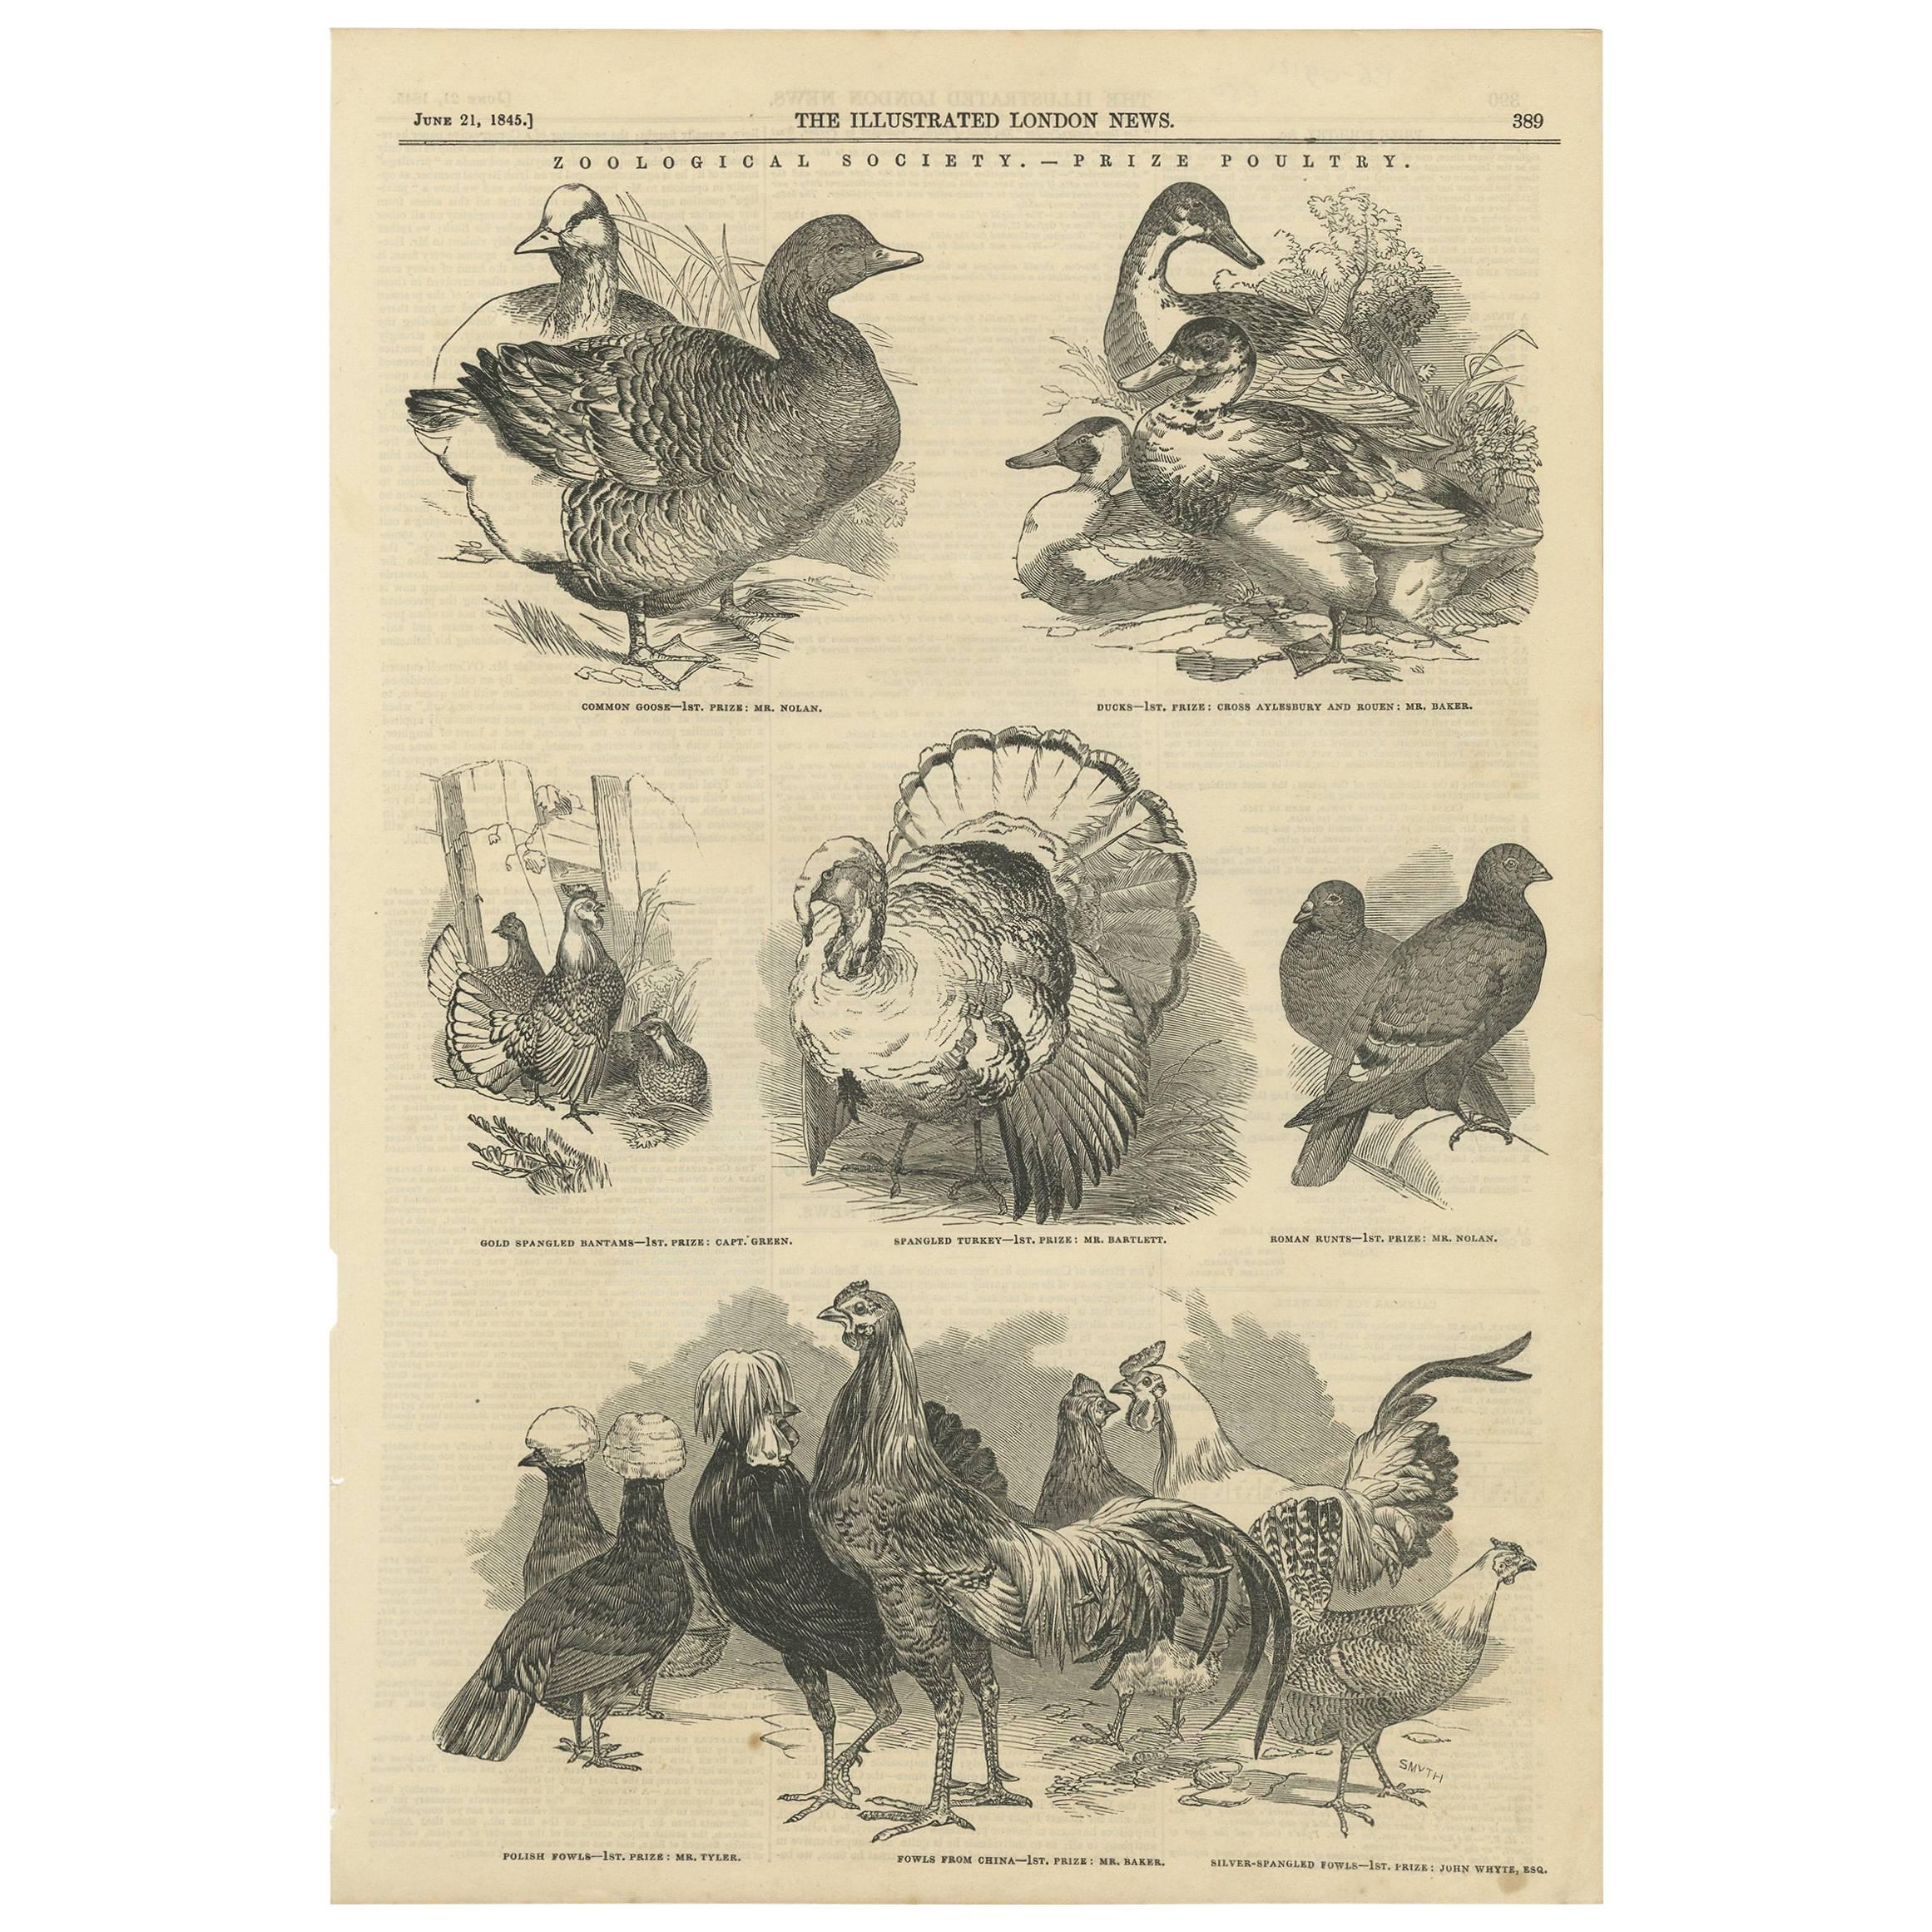 Antique Print of Prize Poultry at the Zoological Society, 1845